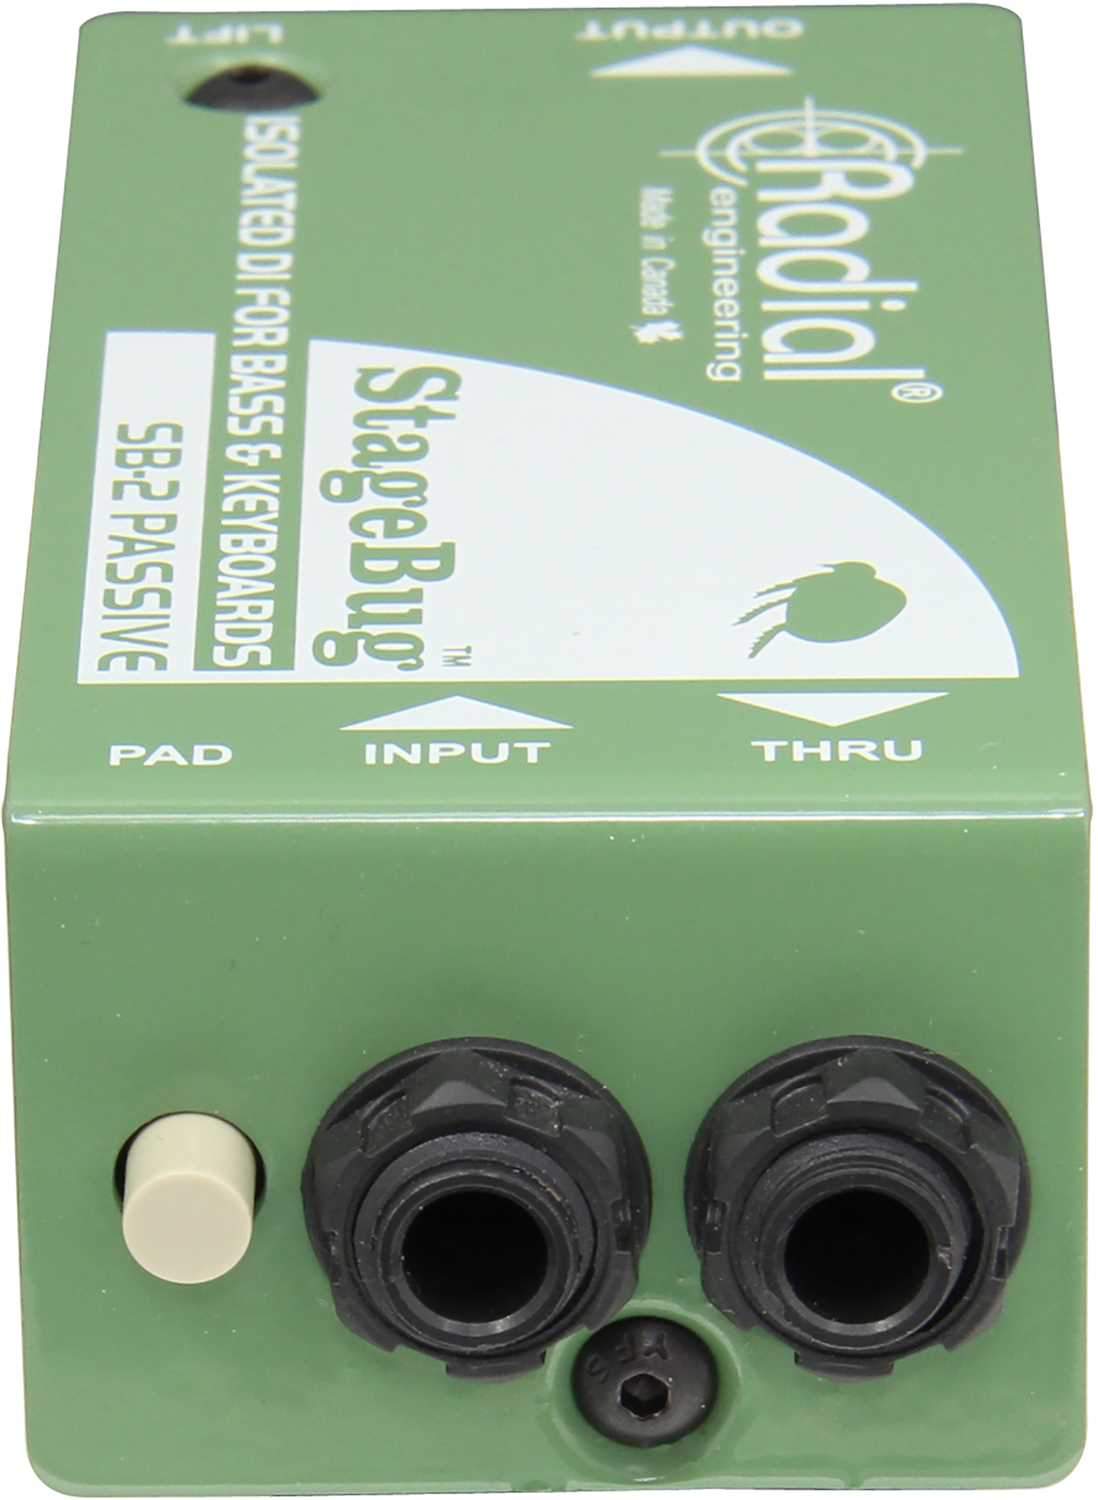 Radial SB-2 Passive Compact DI for Bass & Keys - PSSL ProSound and Stage Lighting